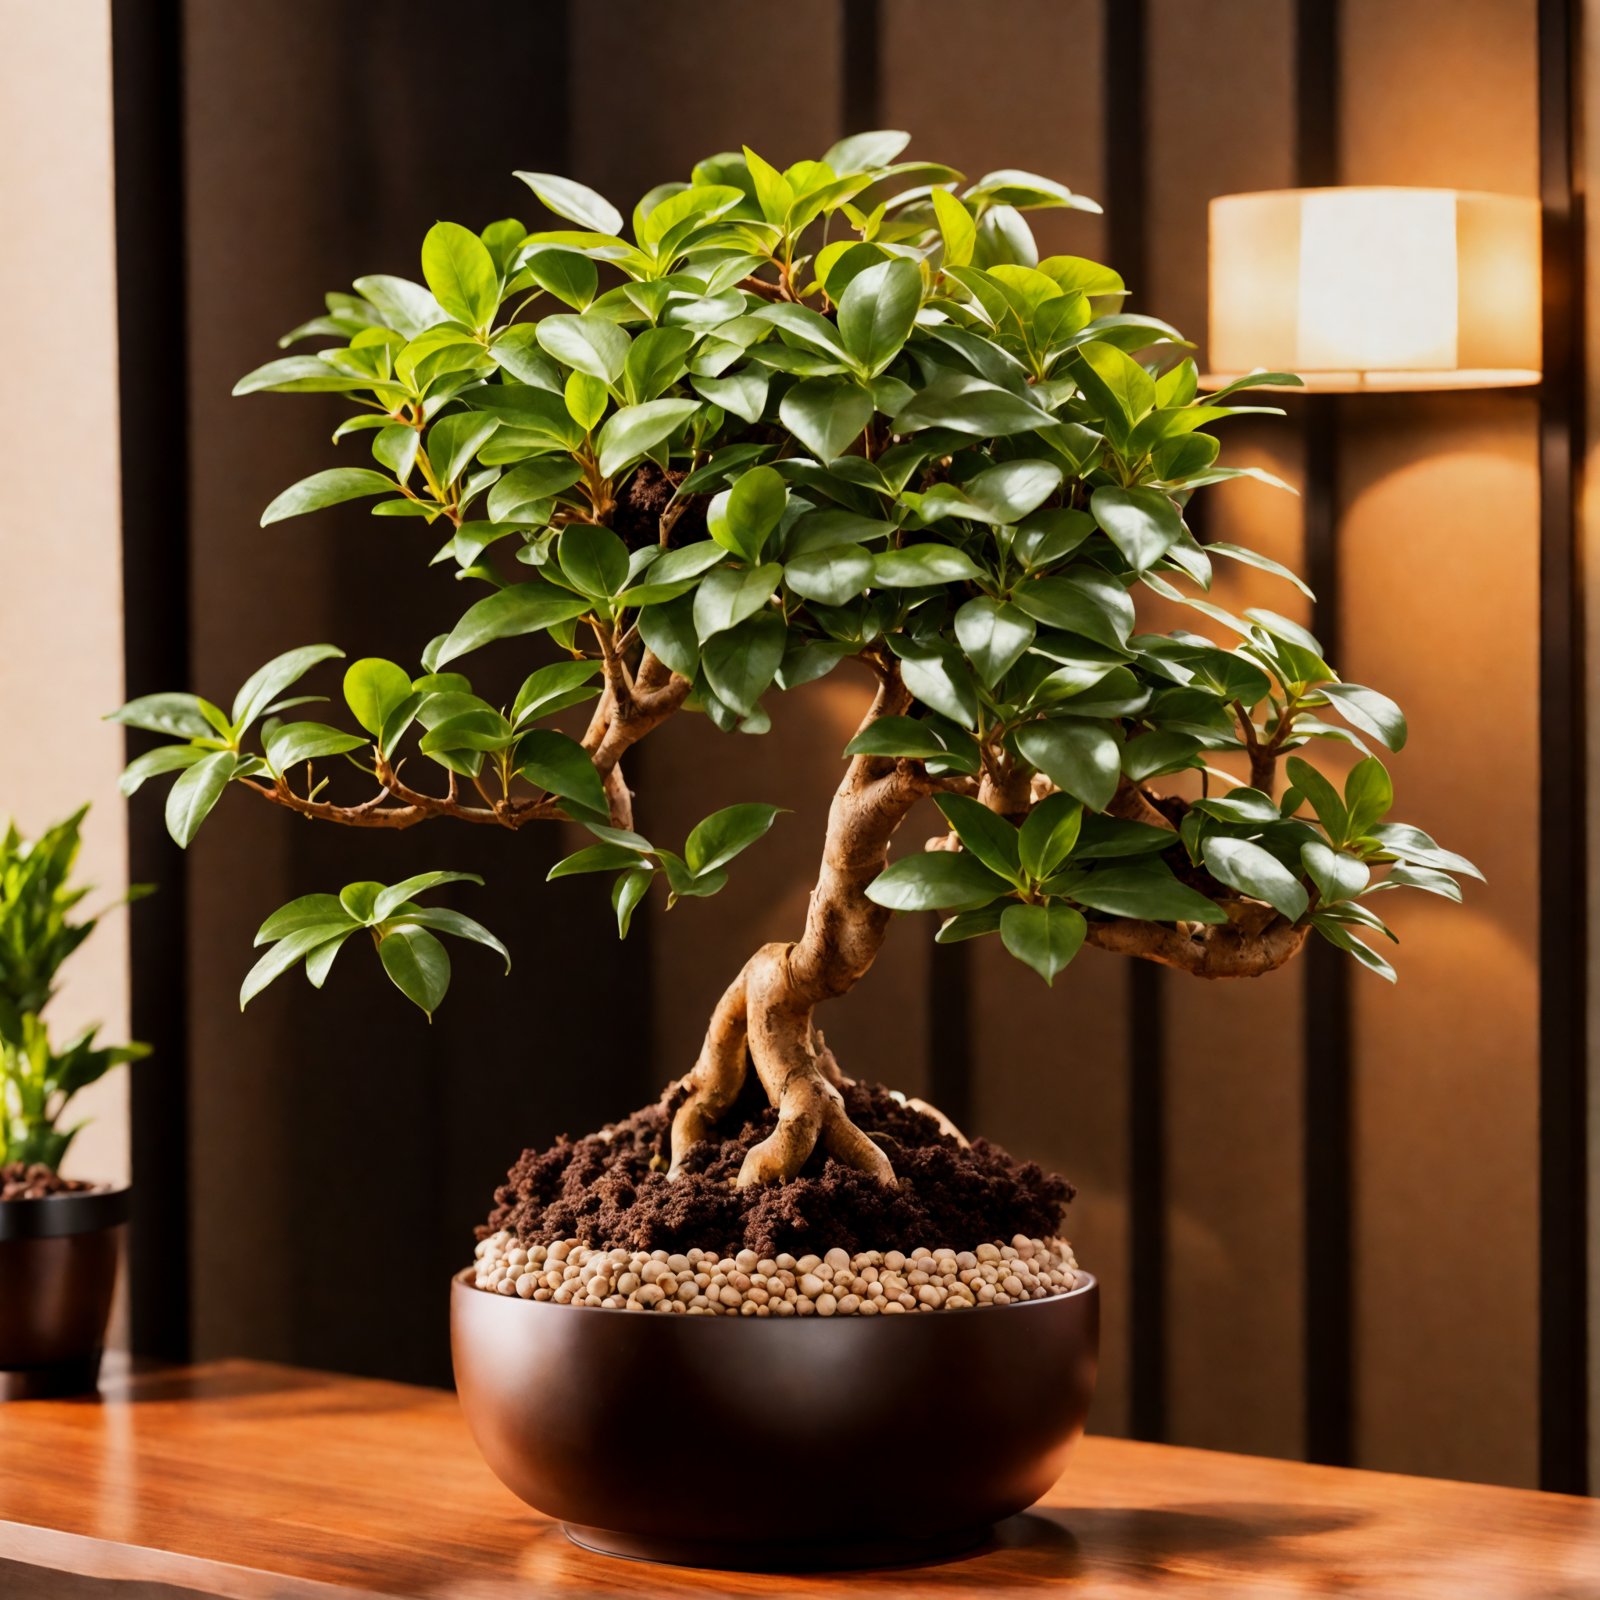 Ficus microcarpa in a brown bowl on a table, with clear lighting and a dark background.